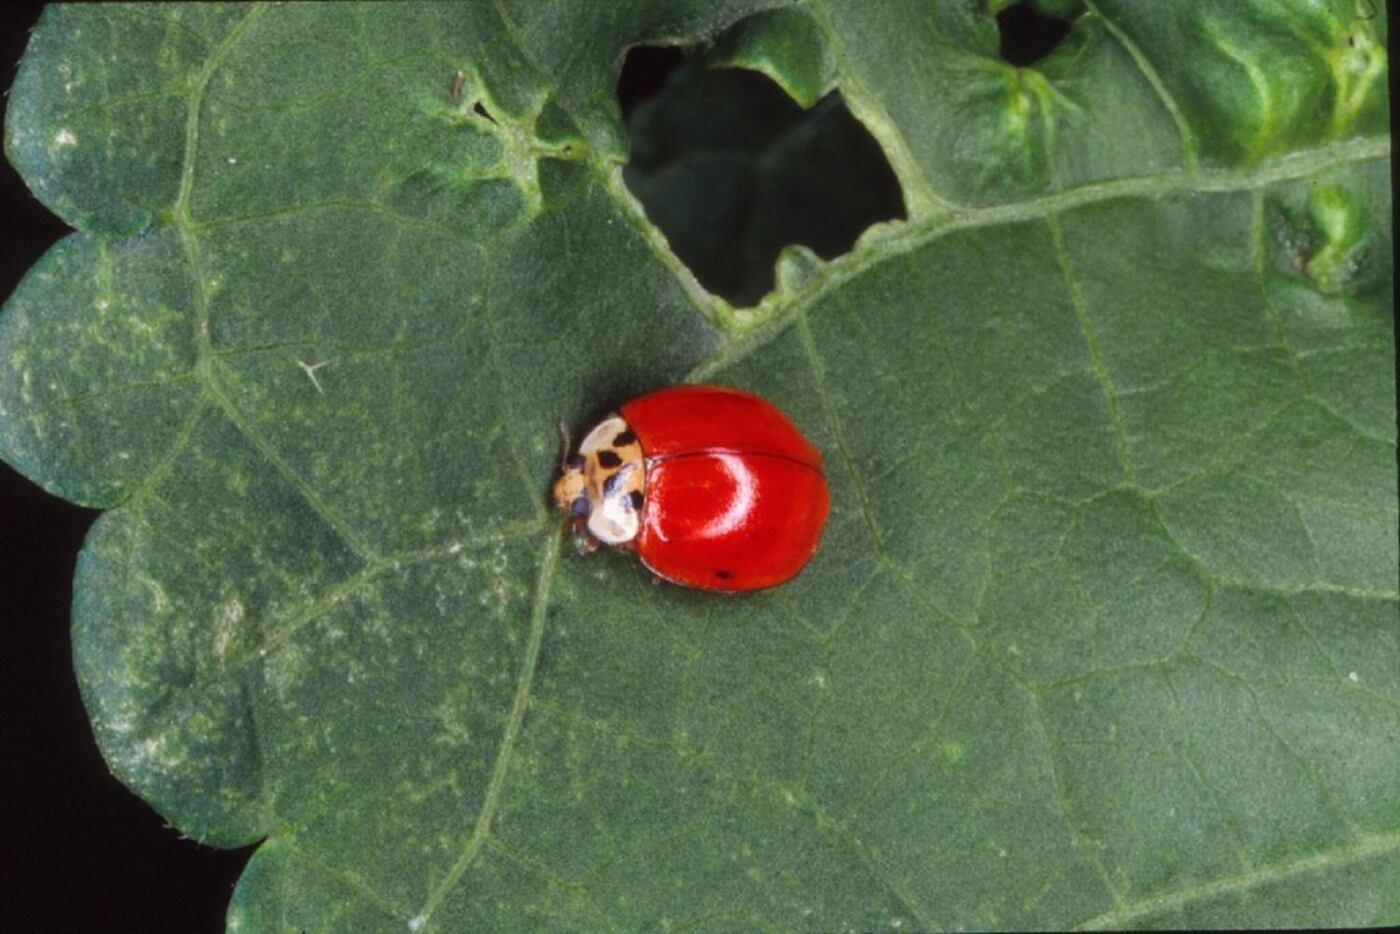 The beneficial Asian ladybug comes in a wide variety of colors and patterns. Notice the...